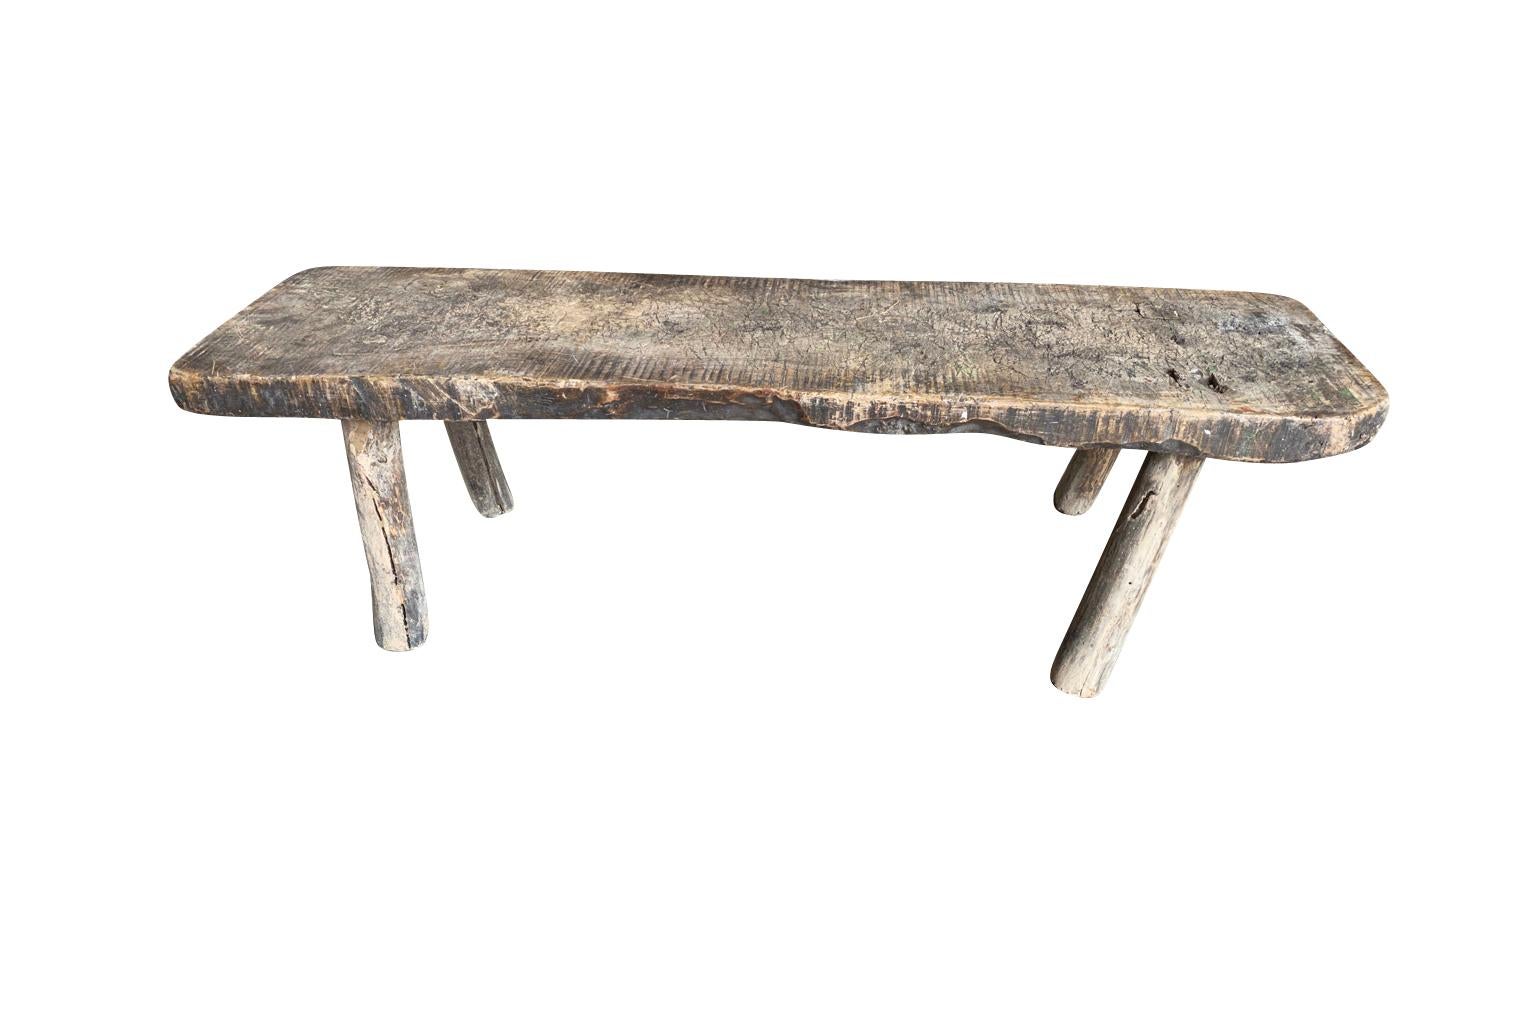 A very charming primitive bench - coffee table from the Catalan area of Spain.  Soundly constructed from beautiful beech wood with a wonderful thick top.  Wonderful graining and patina.  Perfect for any modern or rustic environment. 